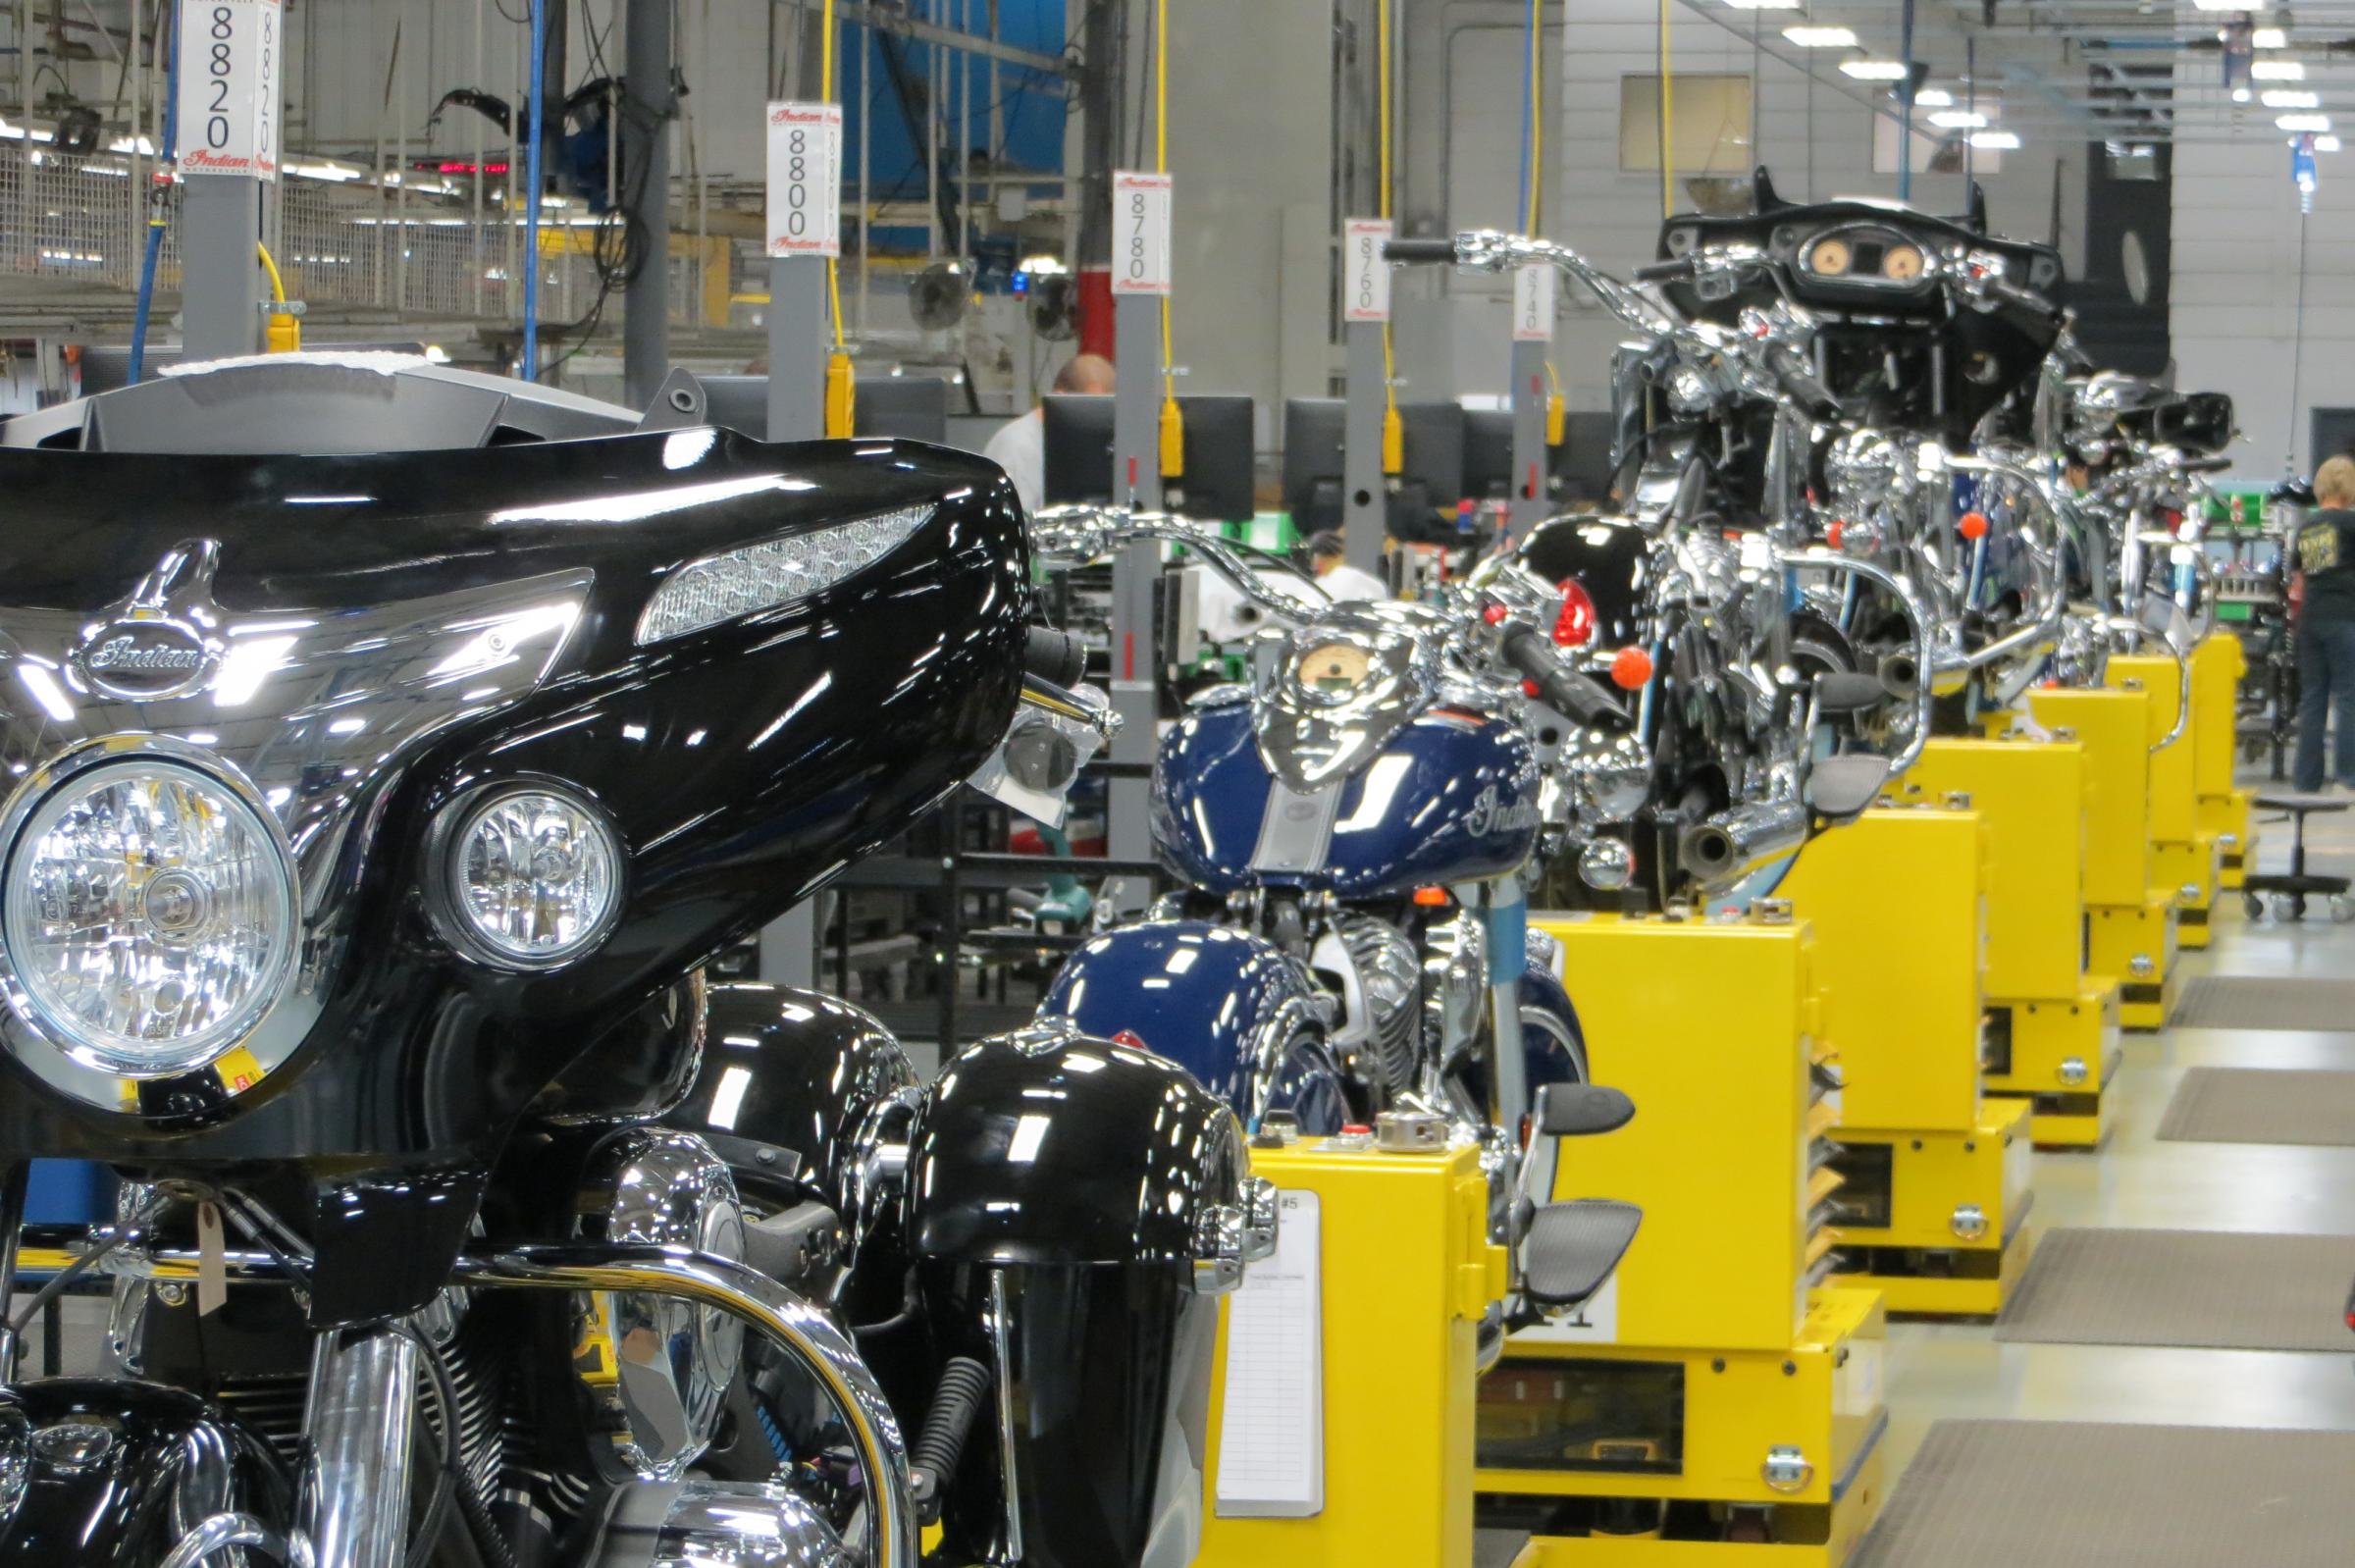 Motorcycle industry manufacturing publi